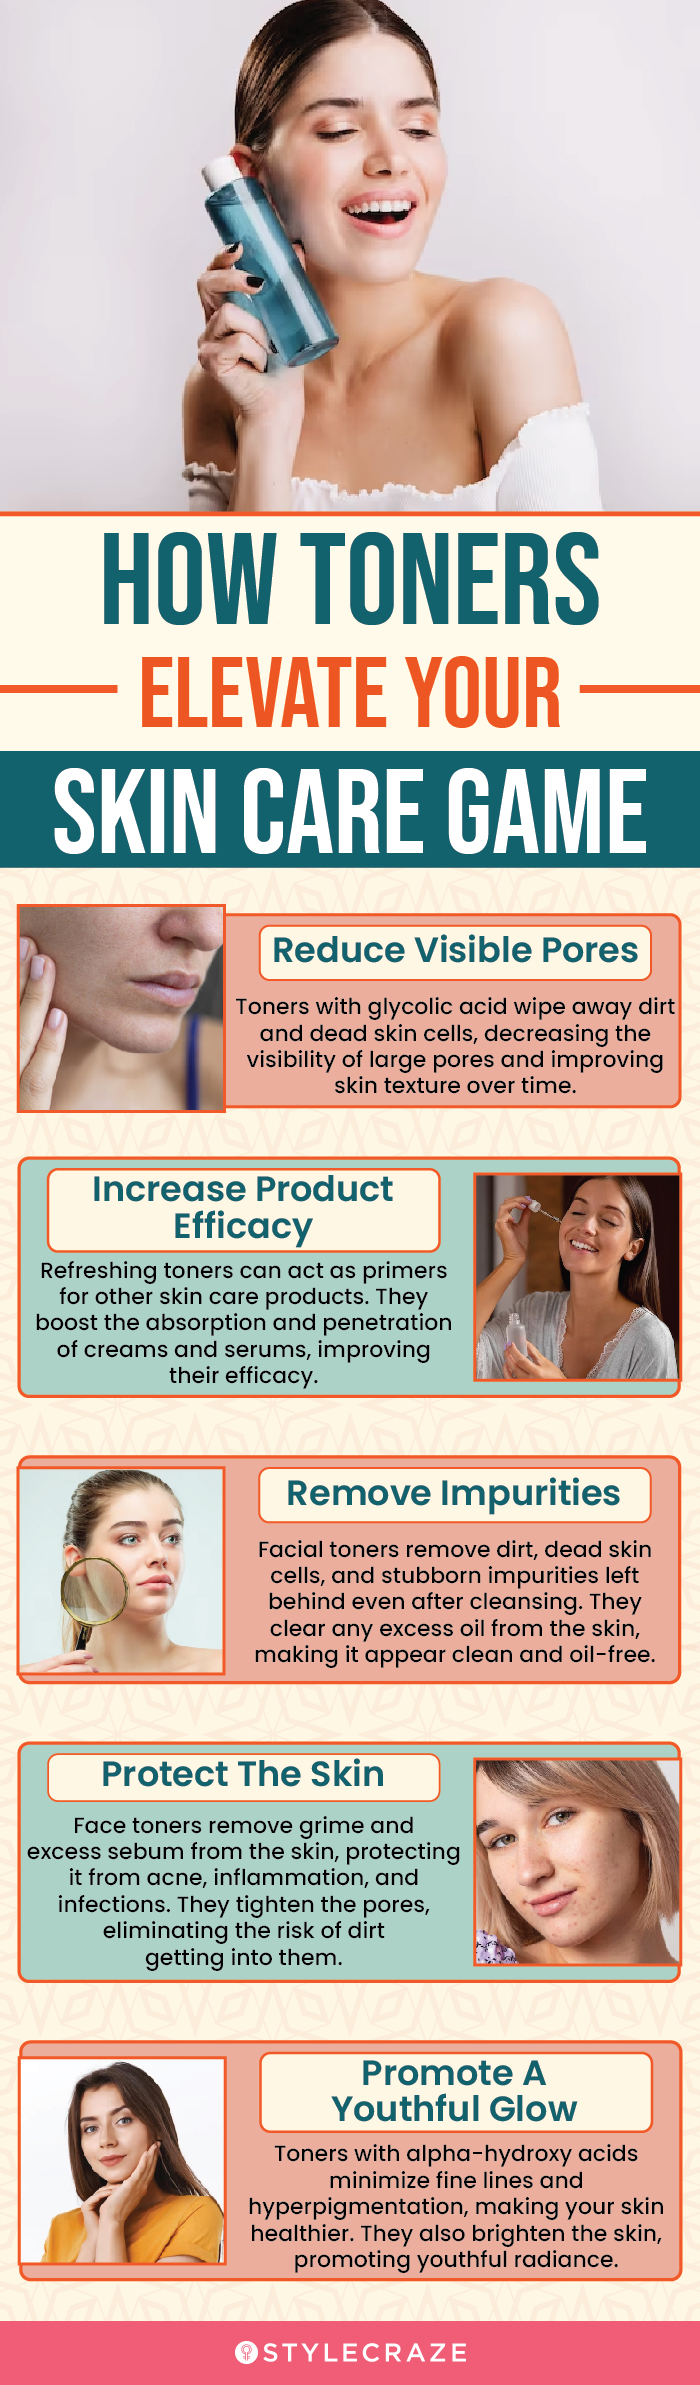 how toners elevate your skin care game (infographic)